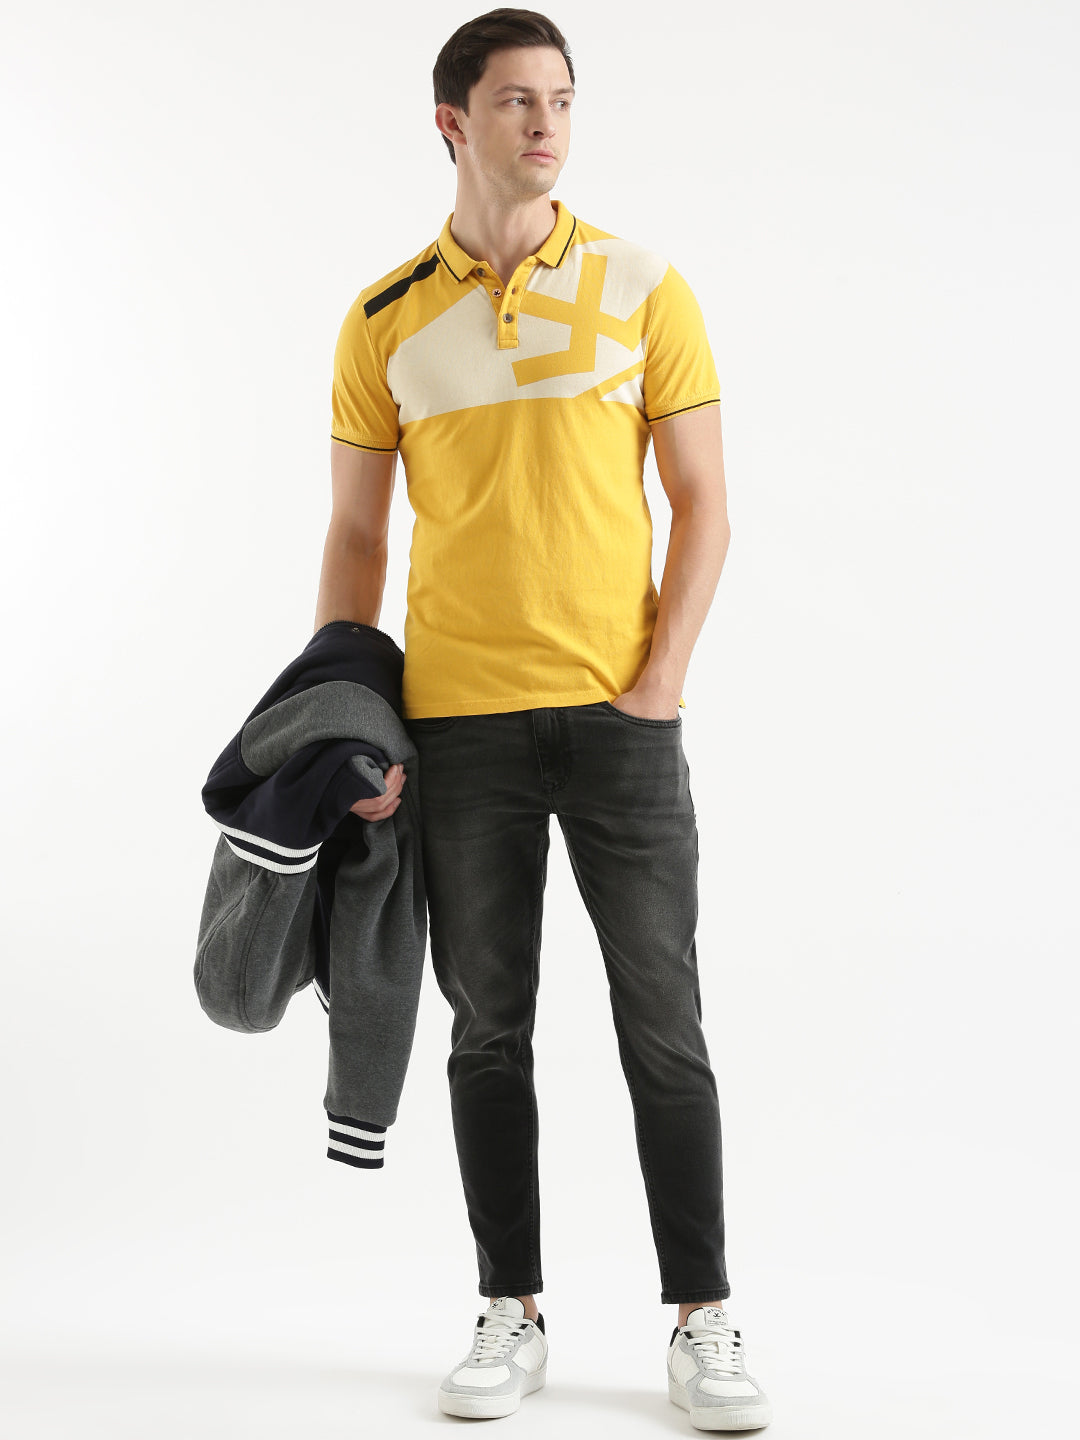 Just Perfect Blocked Polo T-Shirt